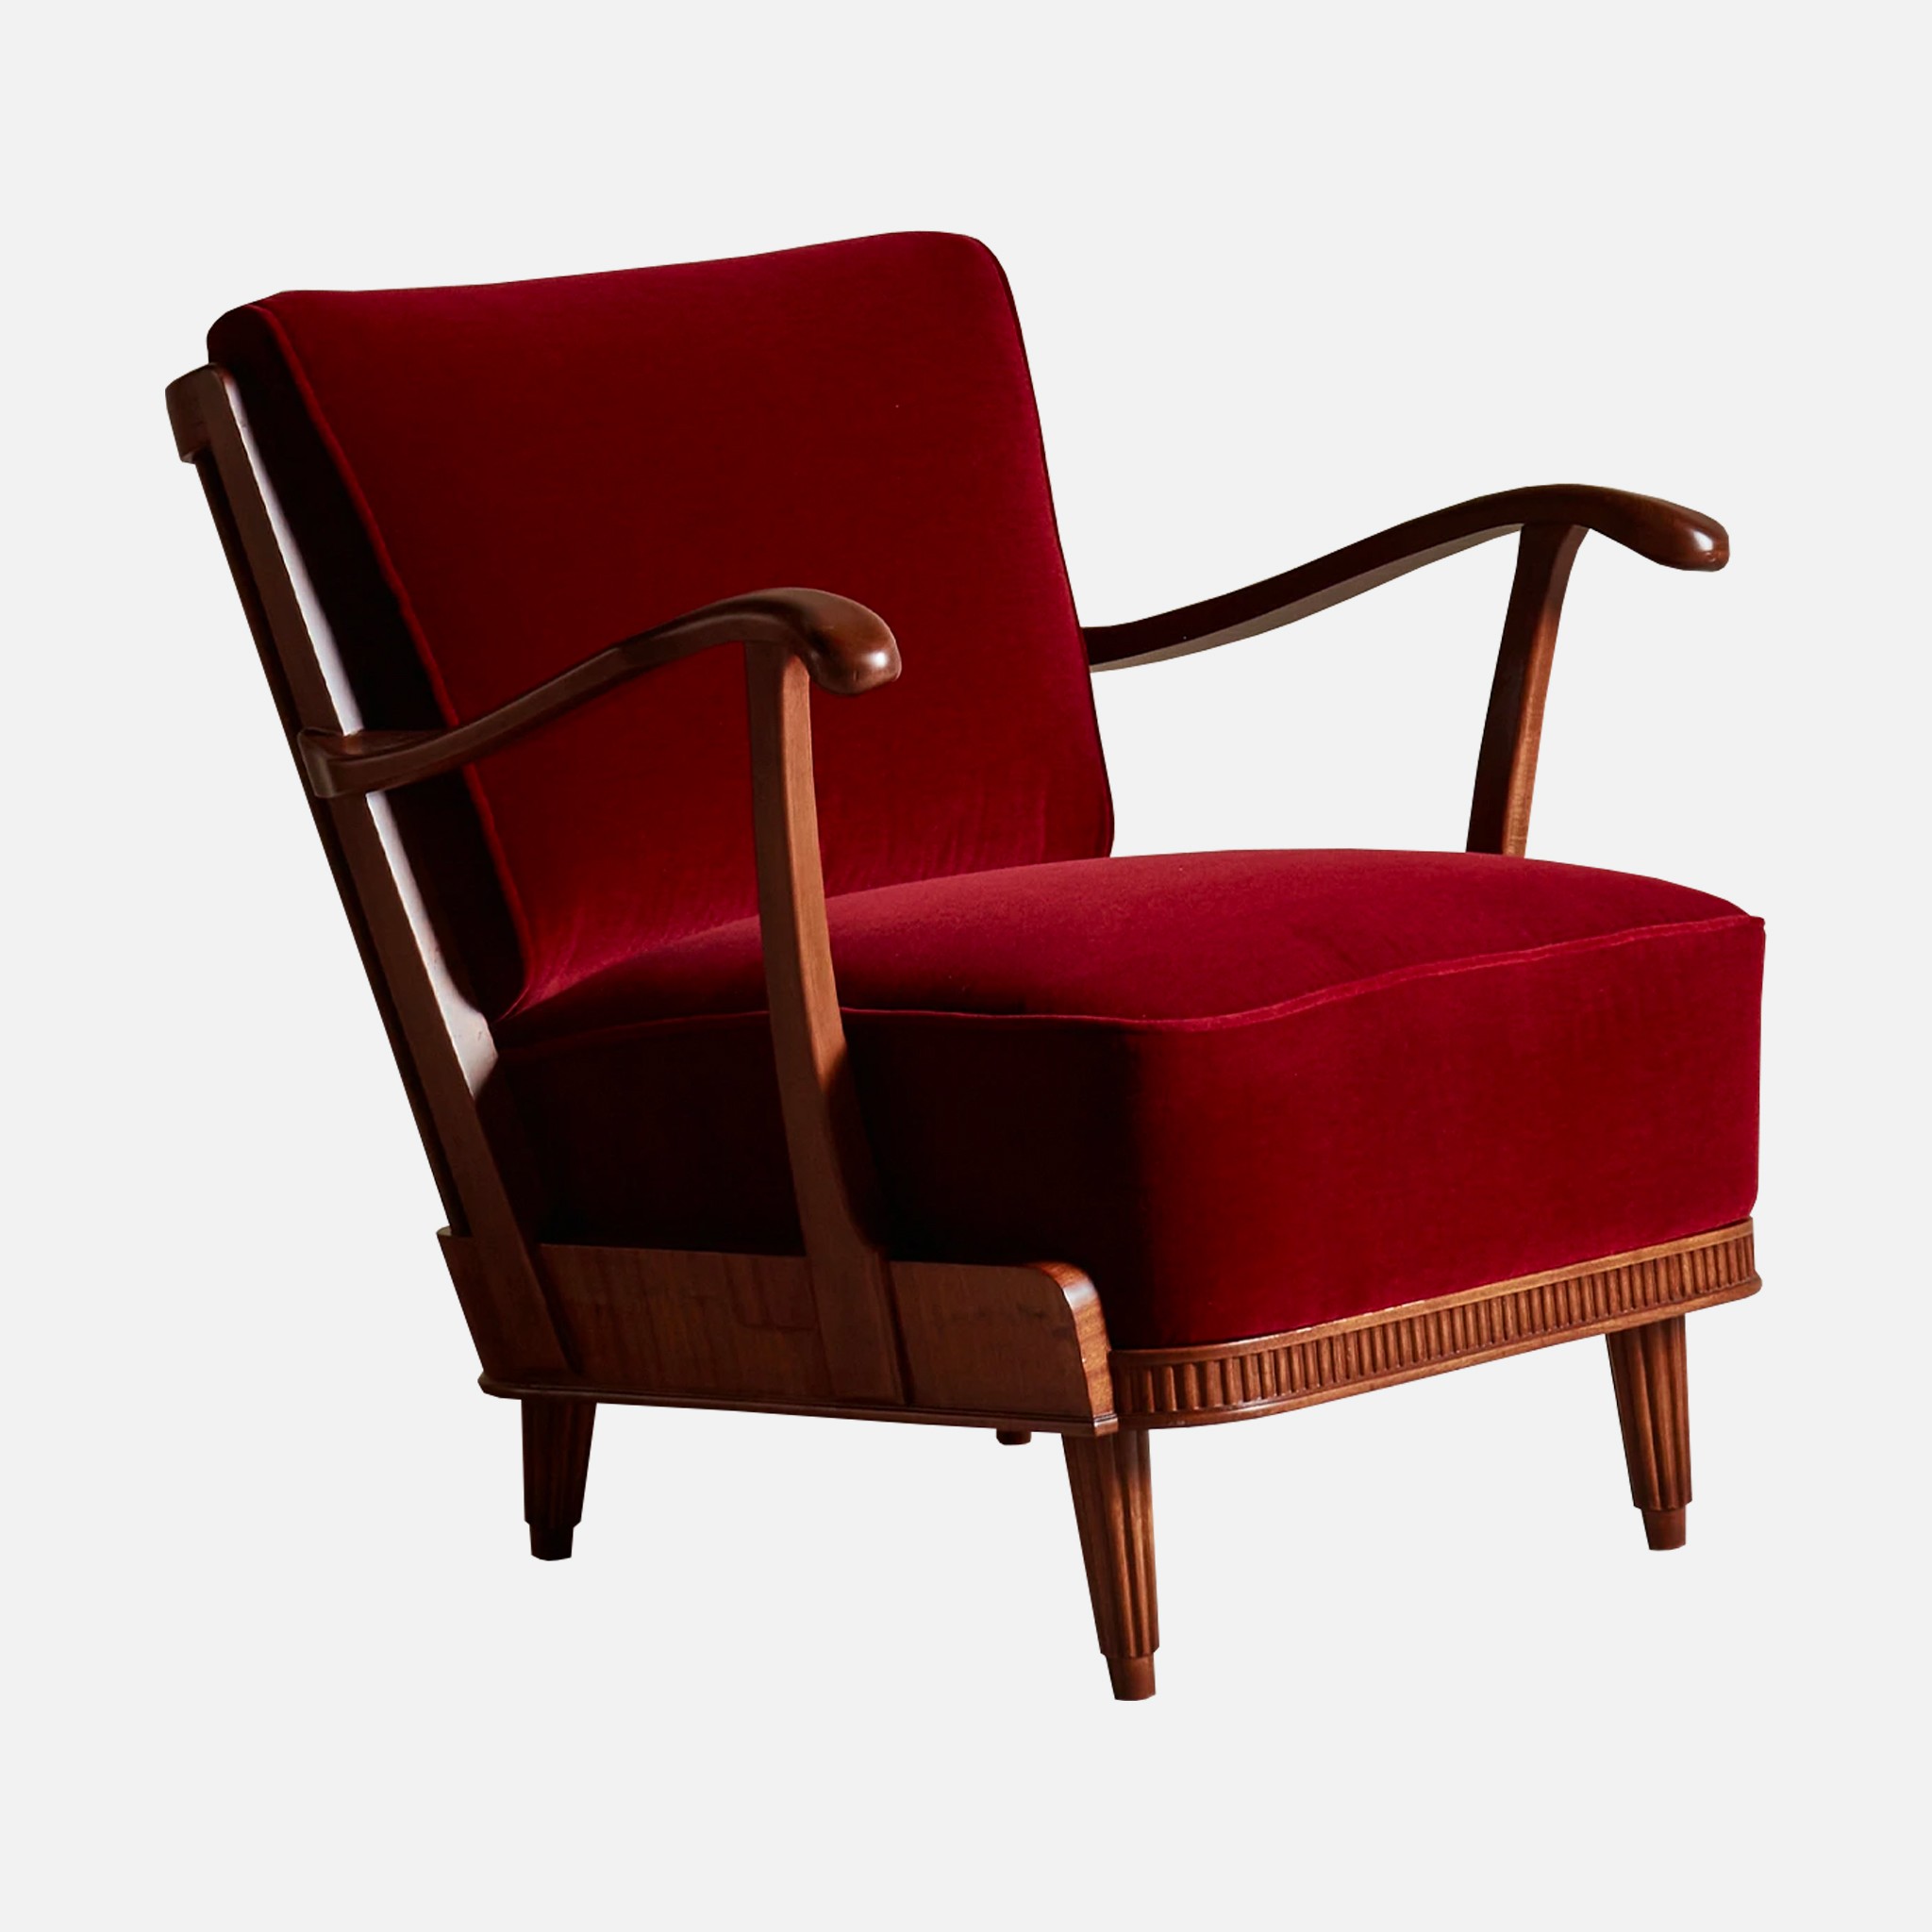 The image of an Svante Skogh Armchair product